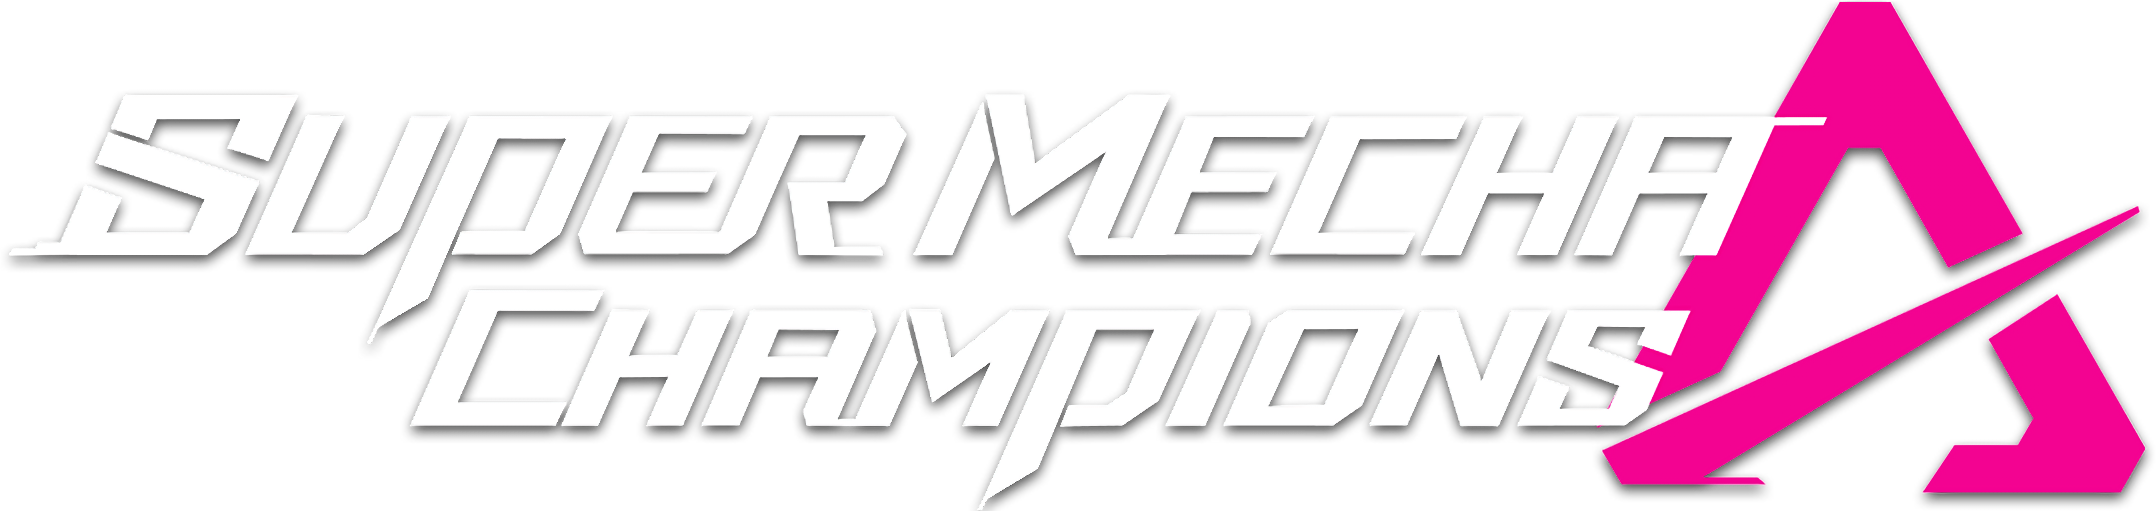 Super Mecha Champions and Granbelm collaborate! - GamerBraves